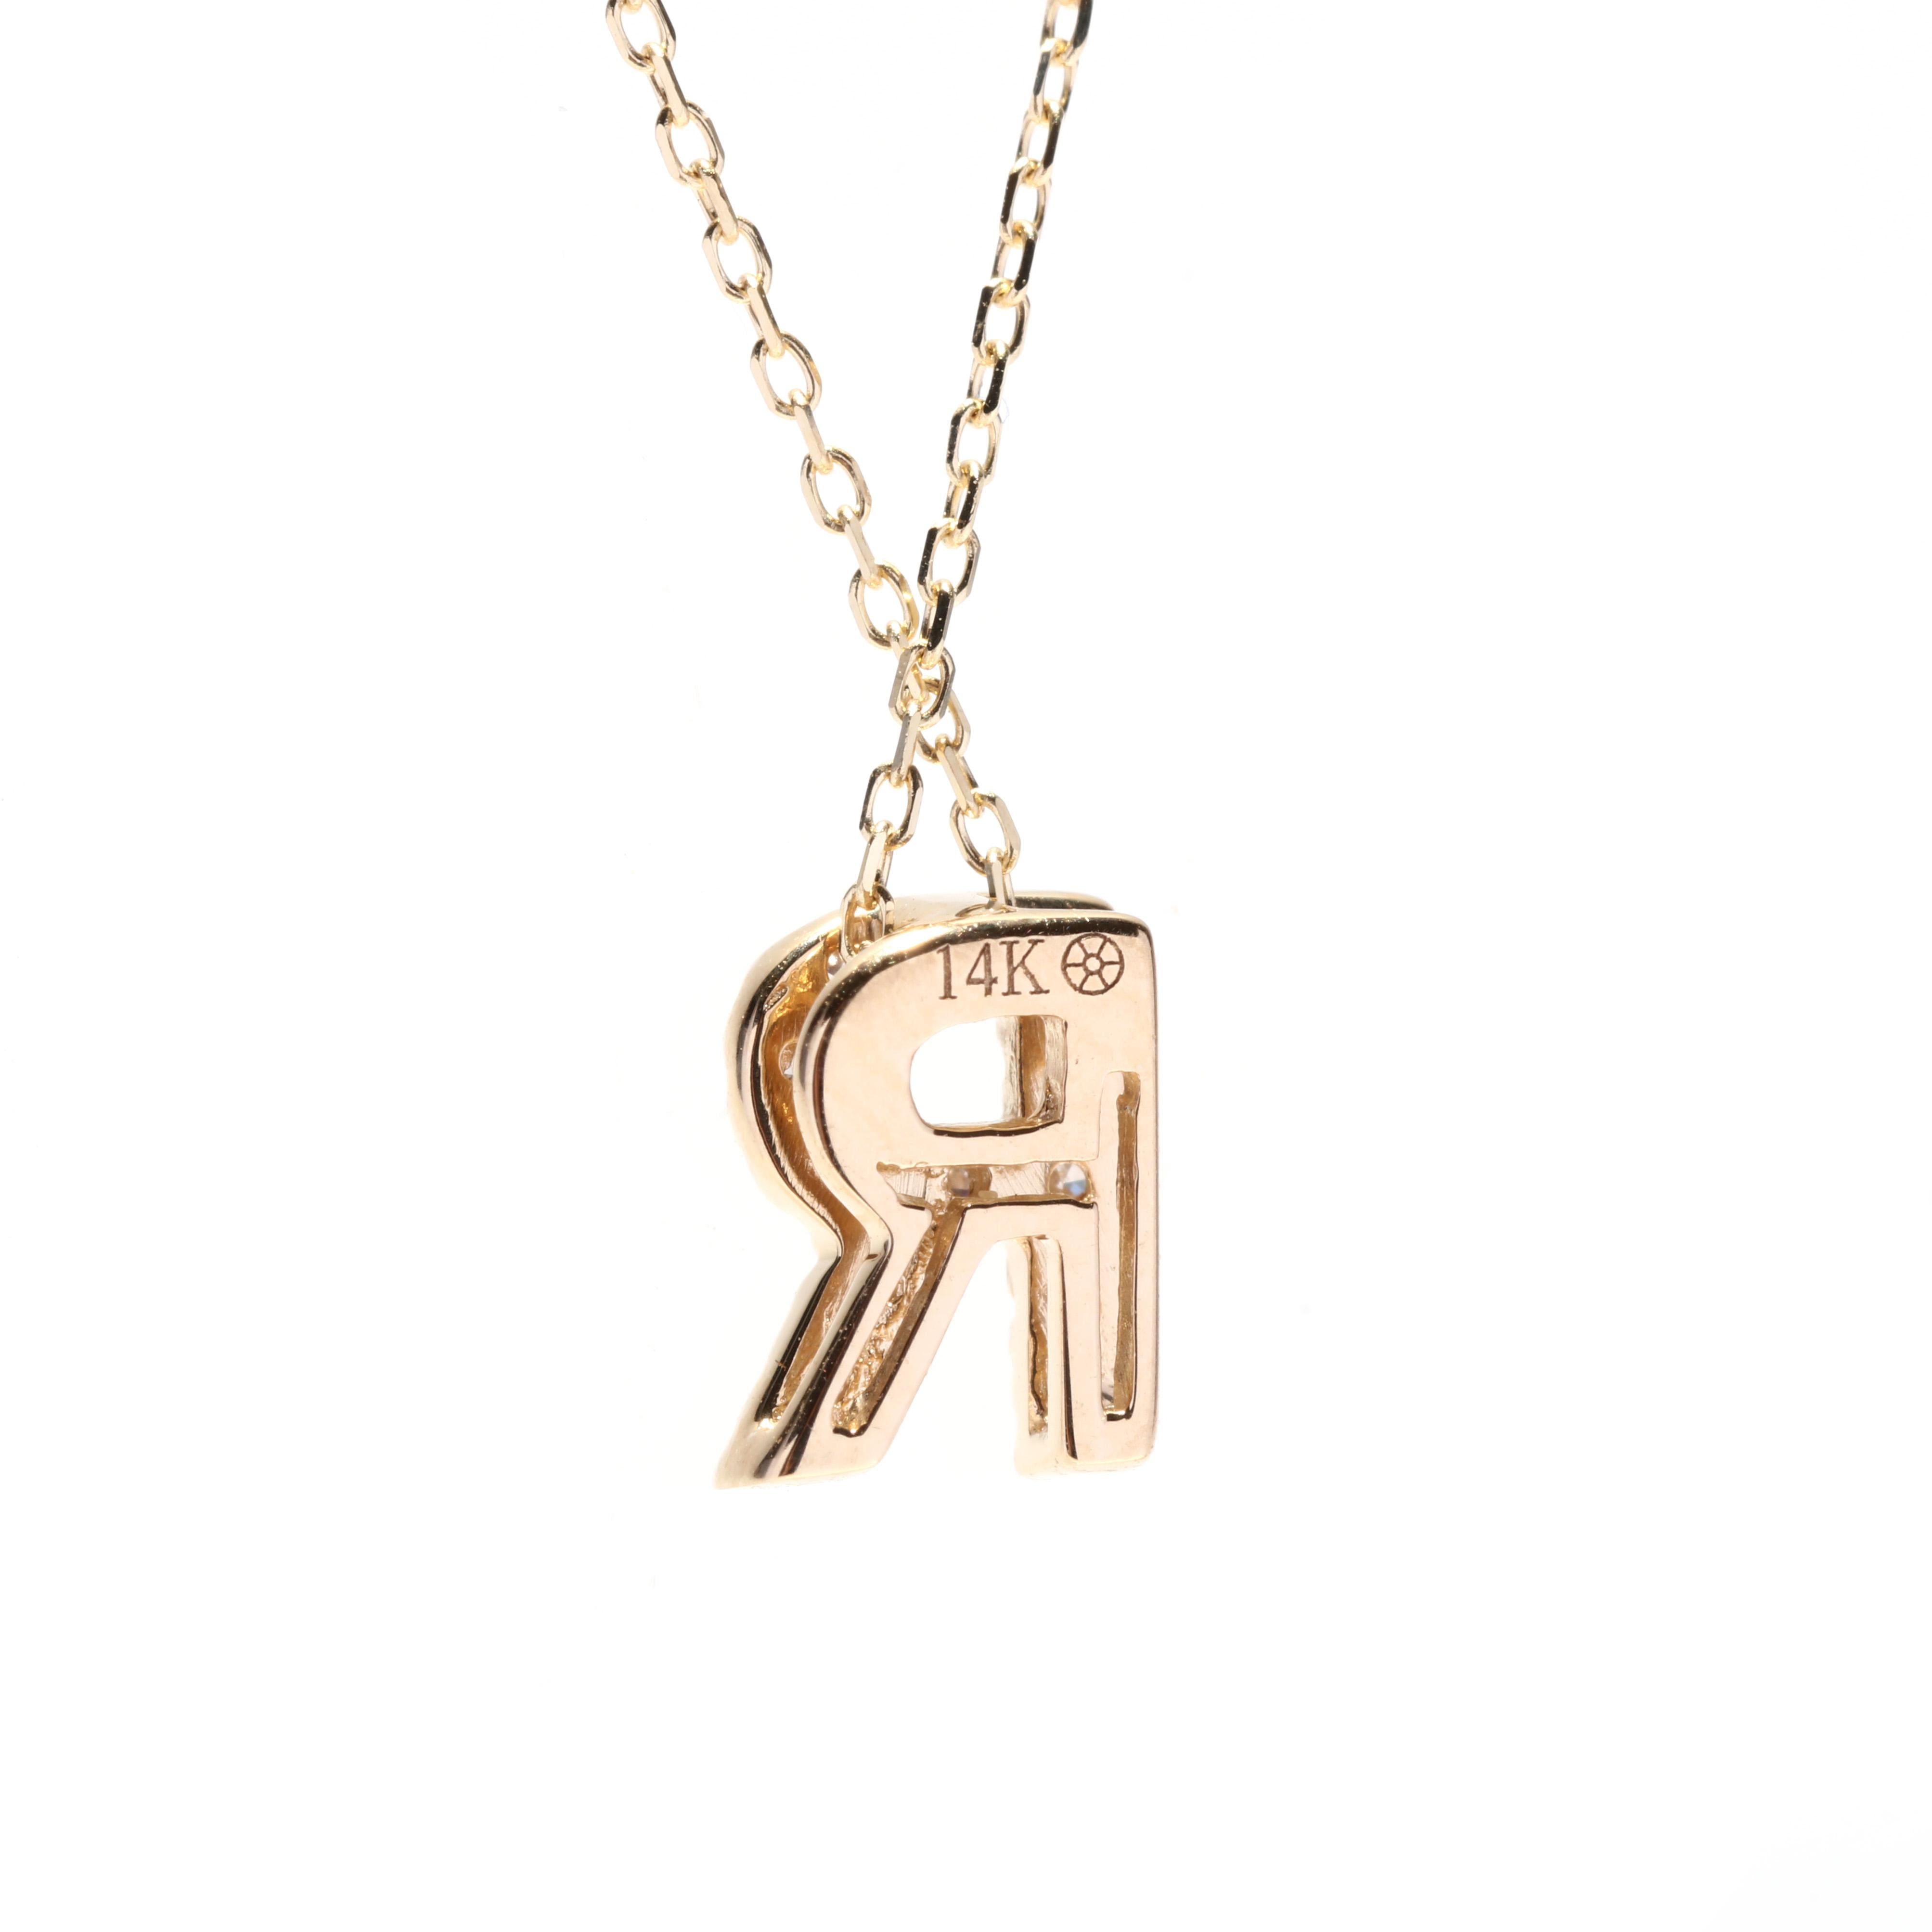 This 14K yellow gold necklace is adorned with a beautiful initial pendant in the shape of the letter R. The pendant features a diamond accent, adding a touch of sparkle and elegance to the piece. The necklace measures 16 inches in length, making it